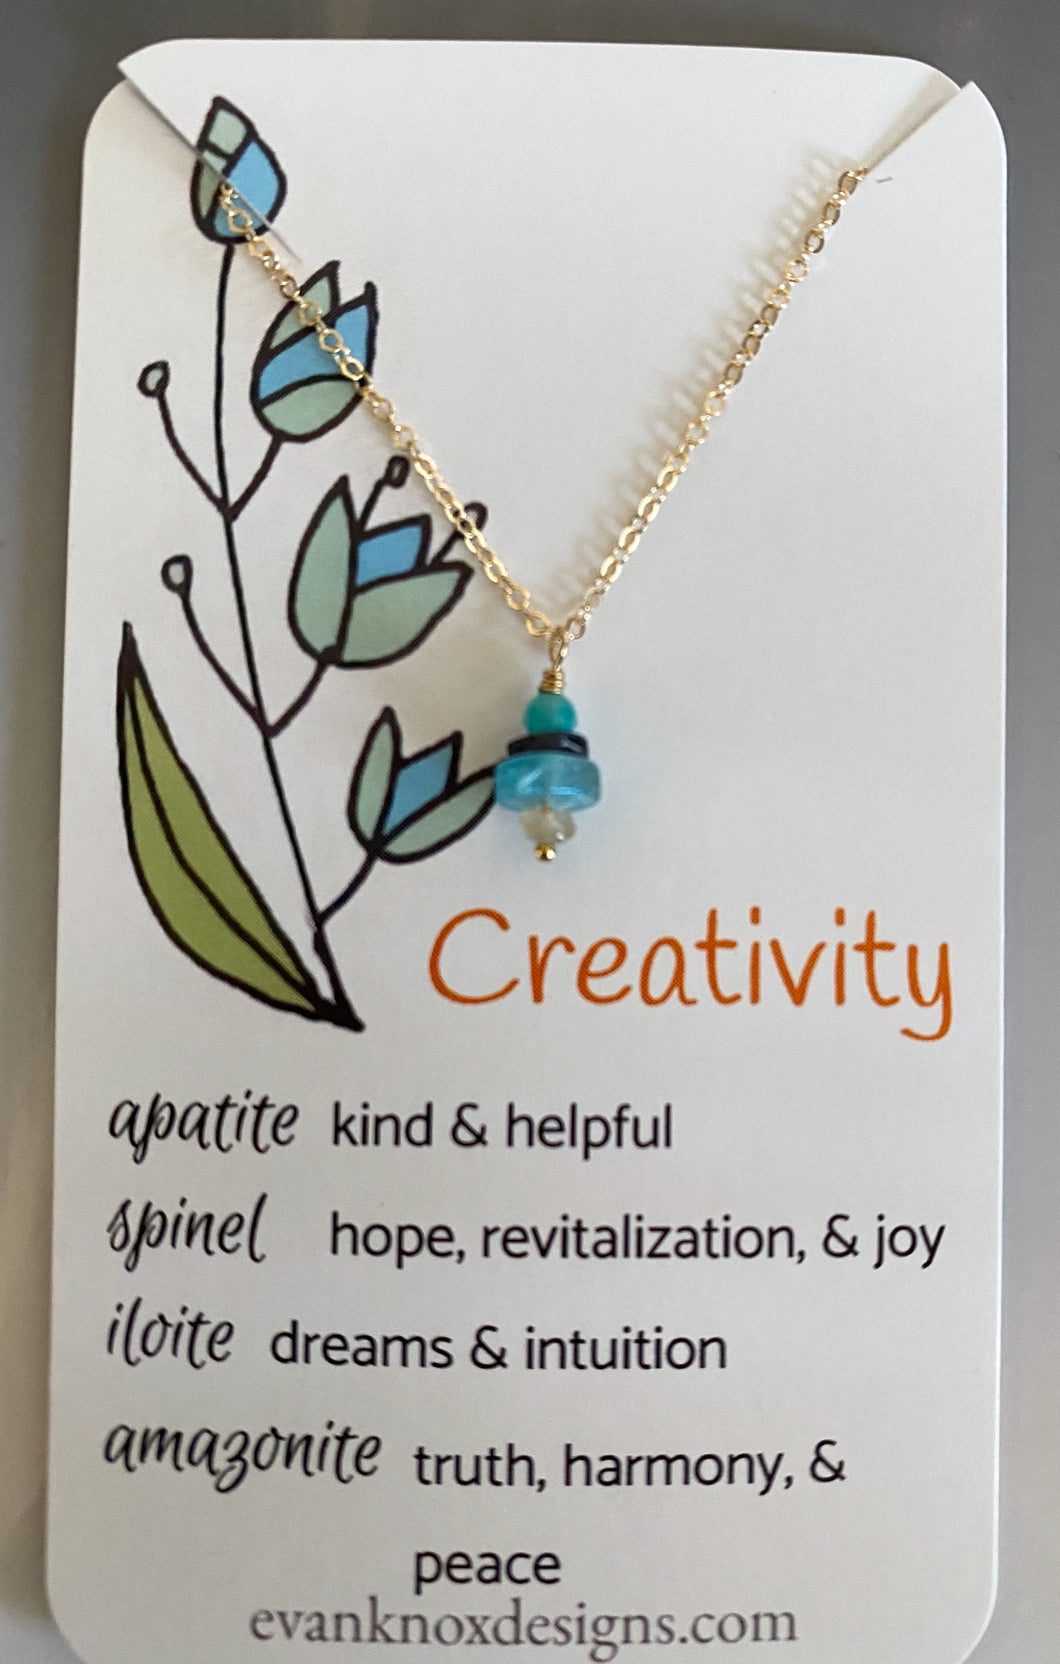 Creativity necklace in gold